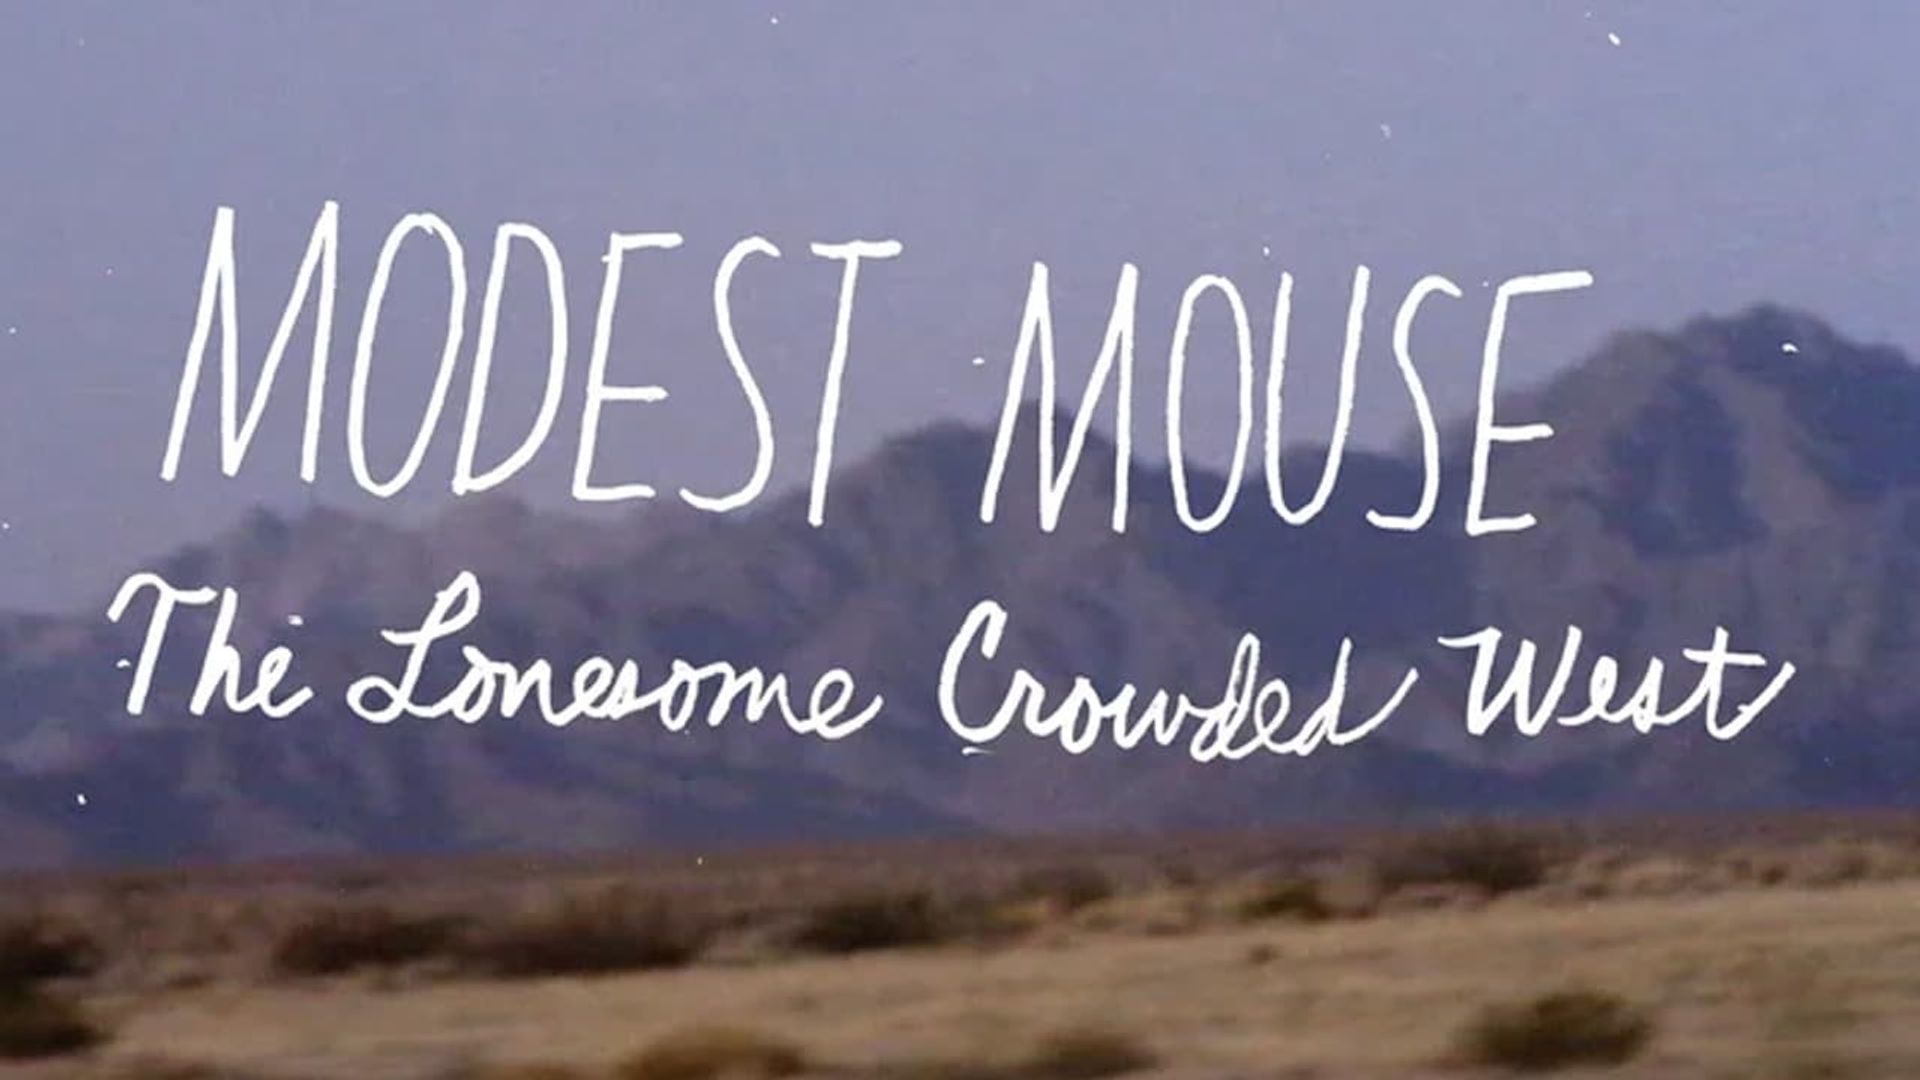 Modest Mouse: The Lonesome Crowded West background